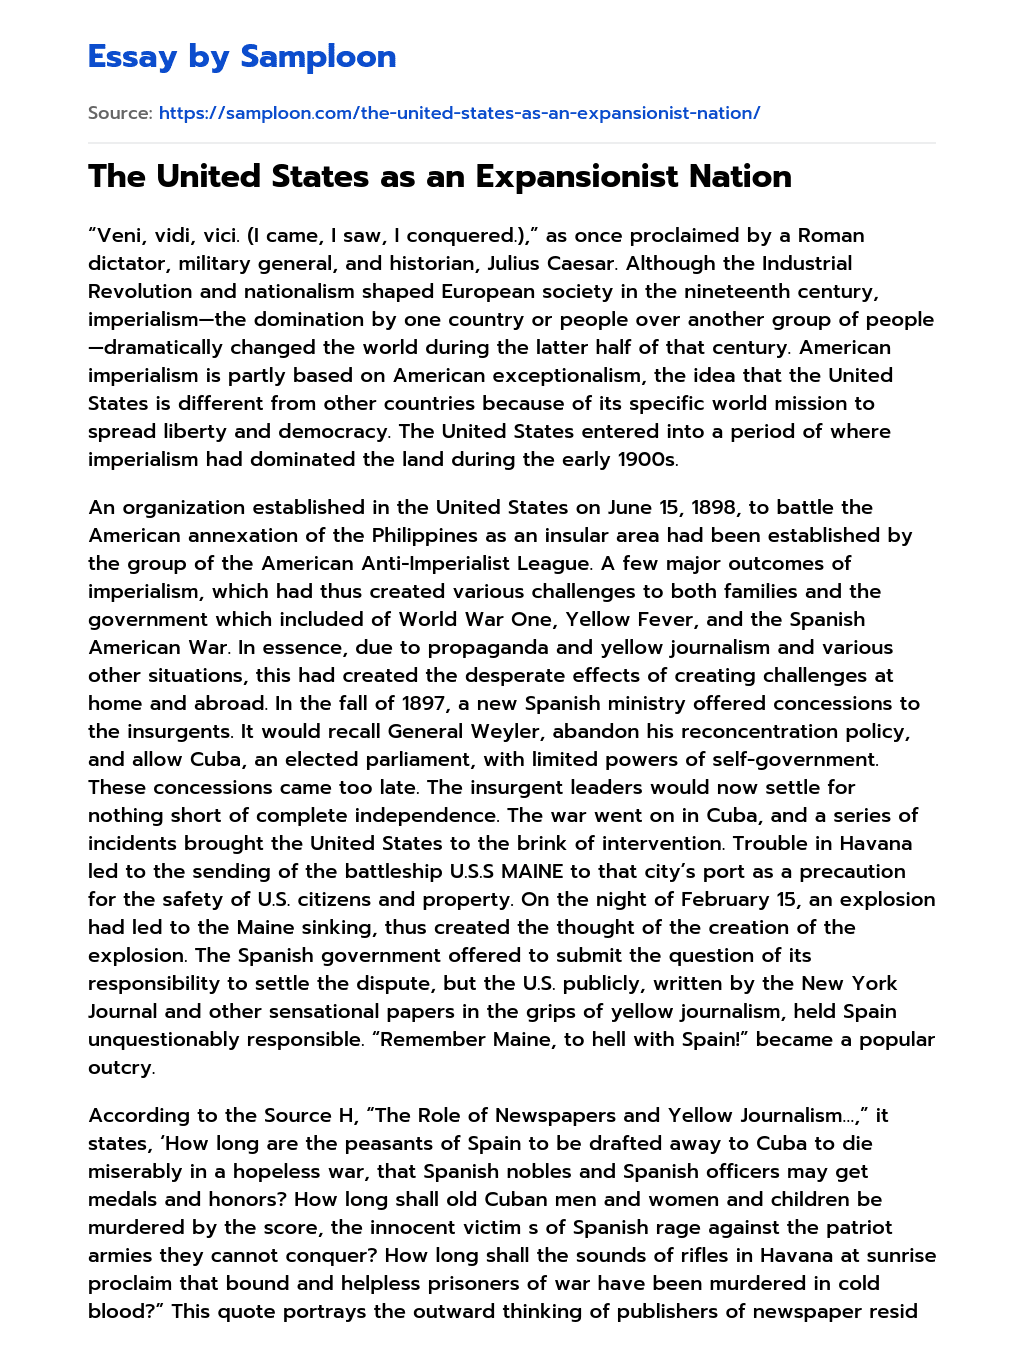 The United States as an Expansionist Nation  essay